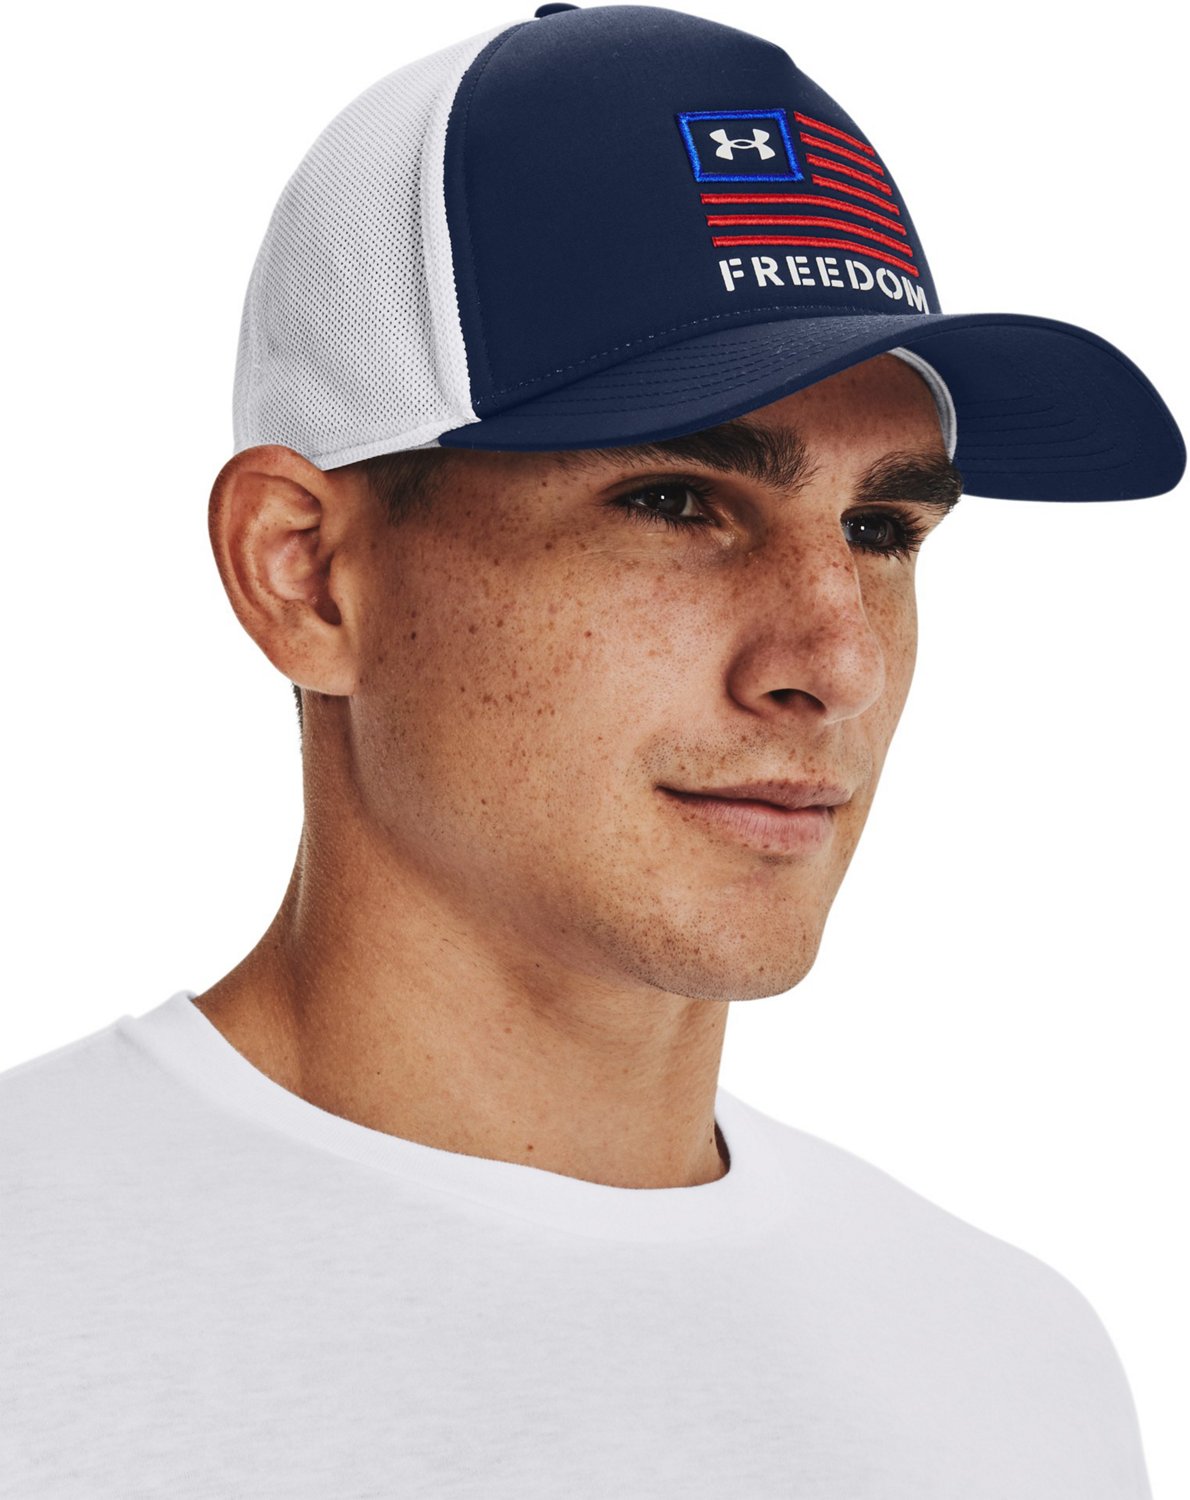 Under Armour Men's Freedom Trucker Cap | Free Shipping at Academy